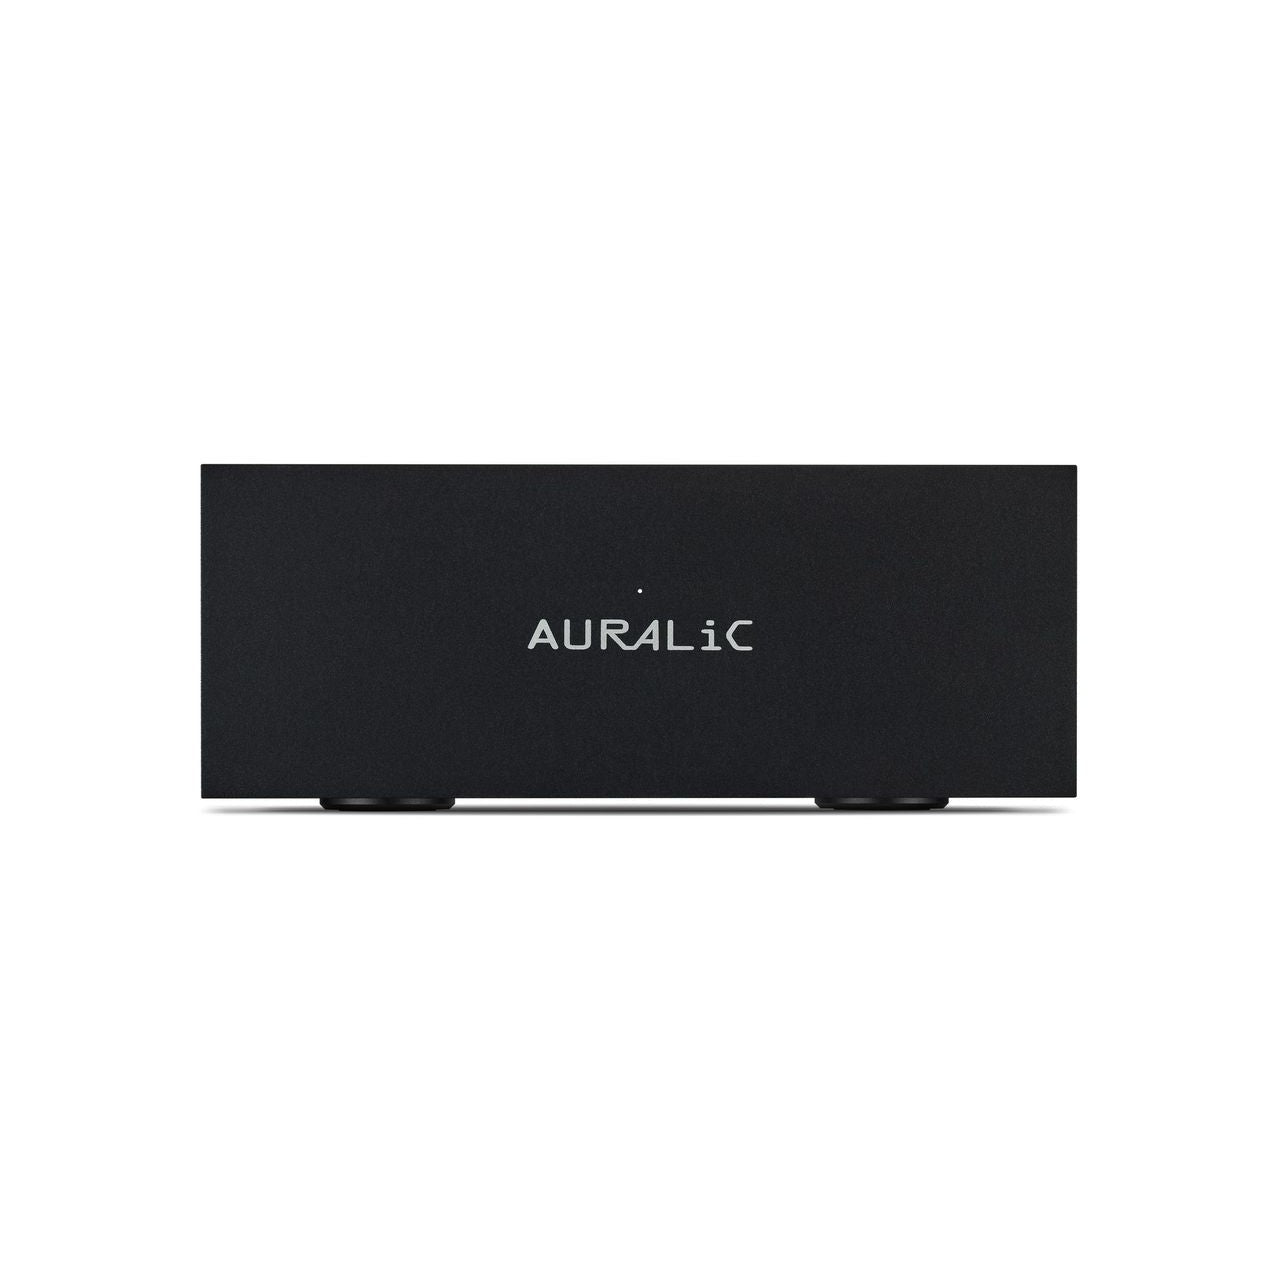 Black Auralic S1 Purer-Power External Power Supply Unit audio equipment with logo displayed on the front, positioned on a flat surface.